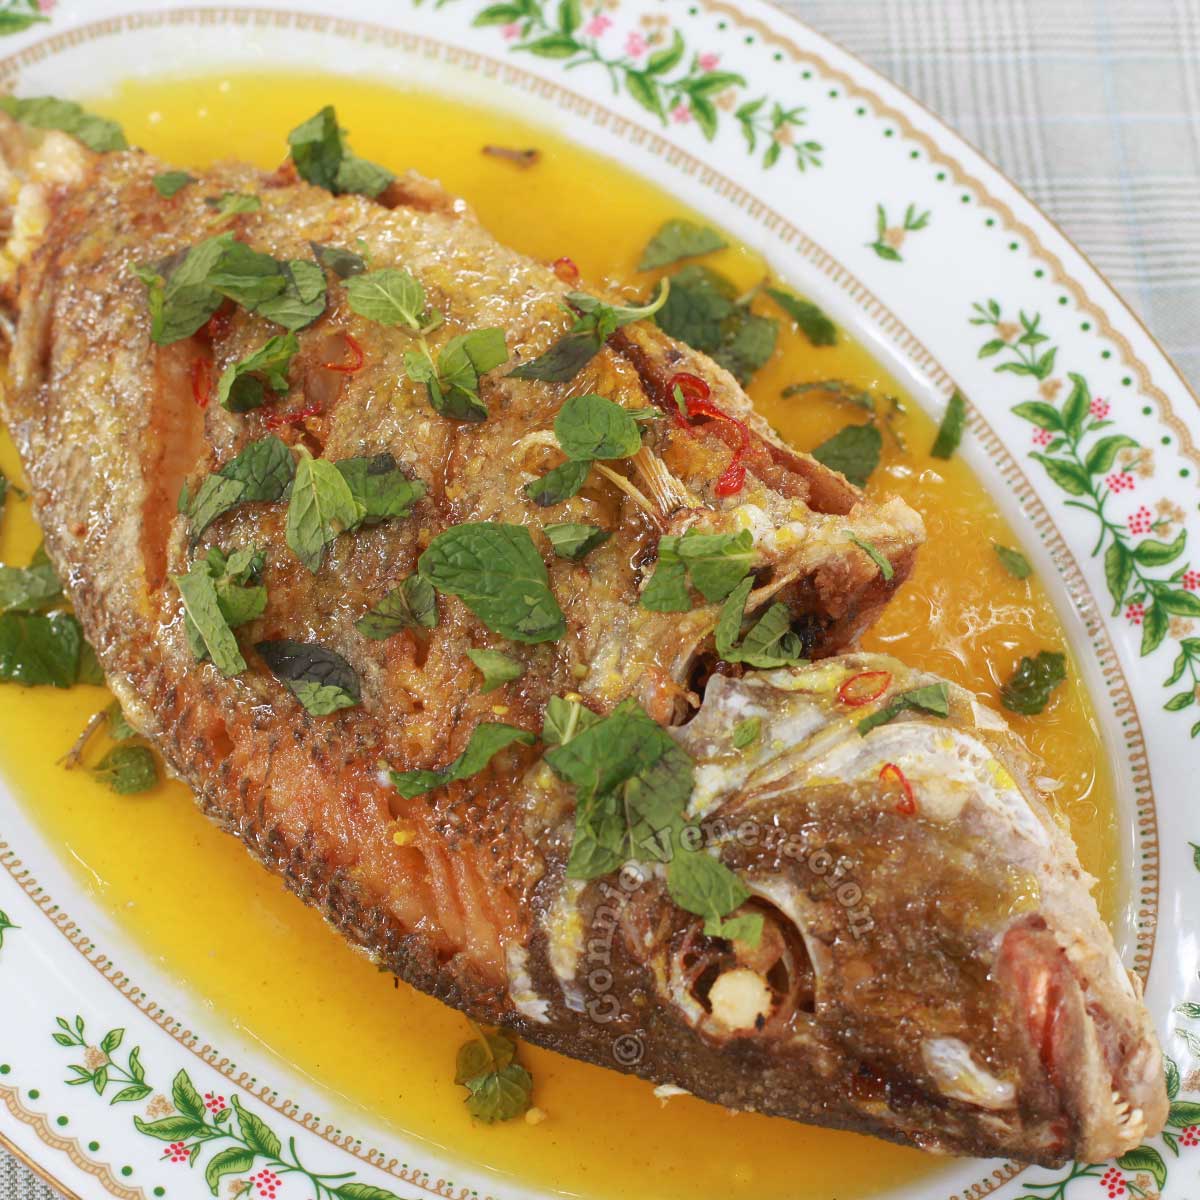 Fried whole fish with lemon sauce garnished with mint leaves